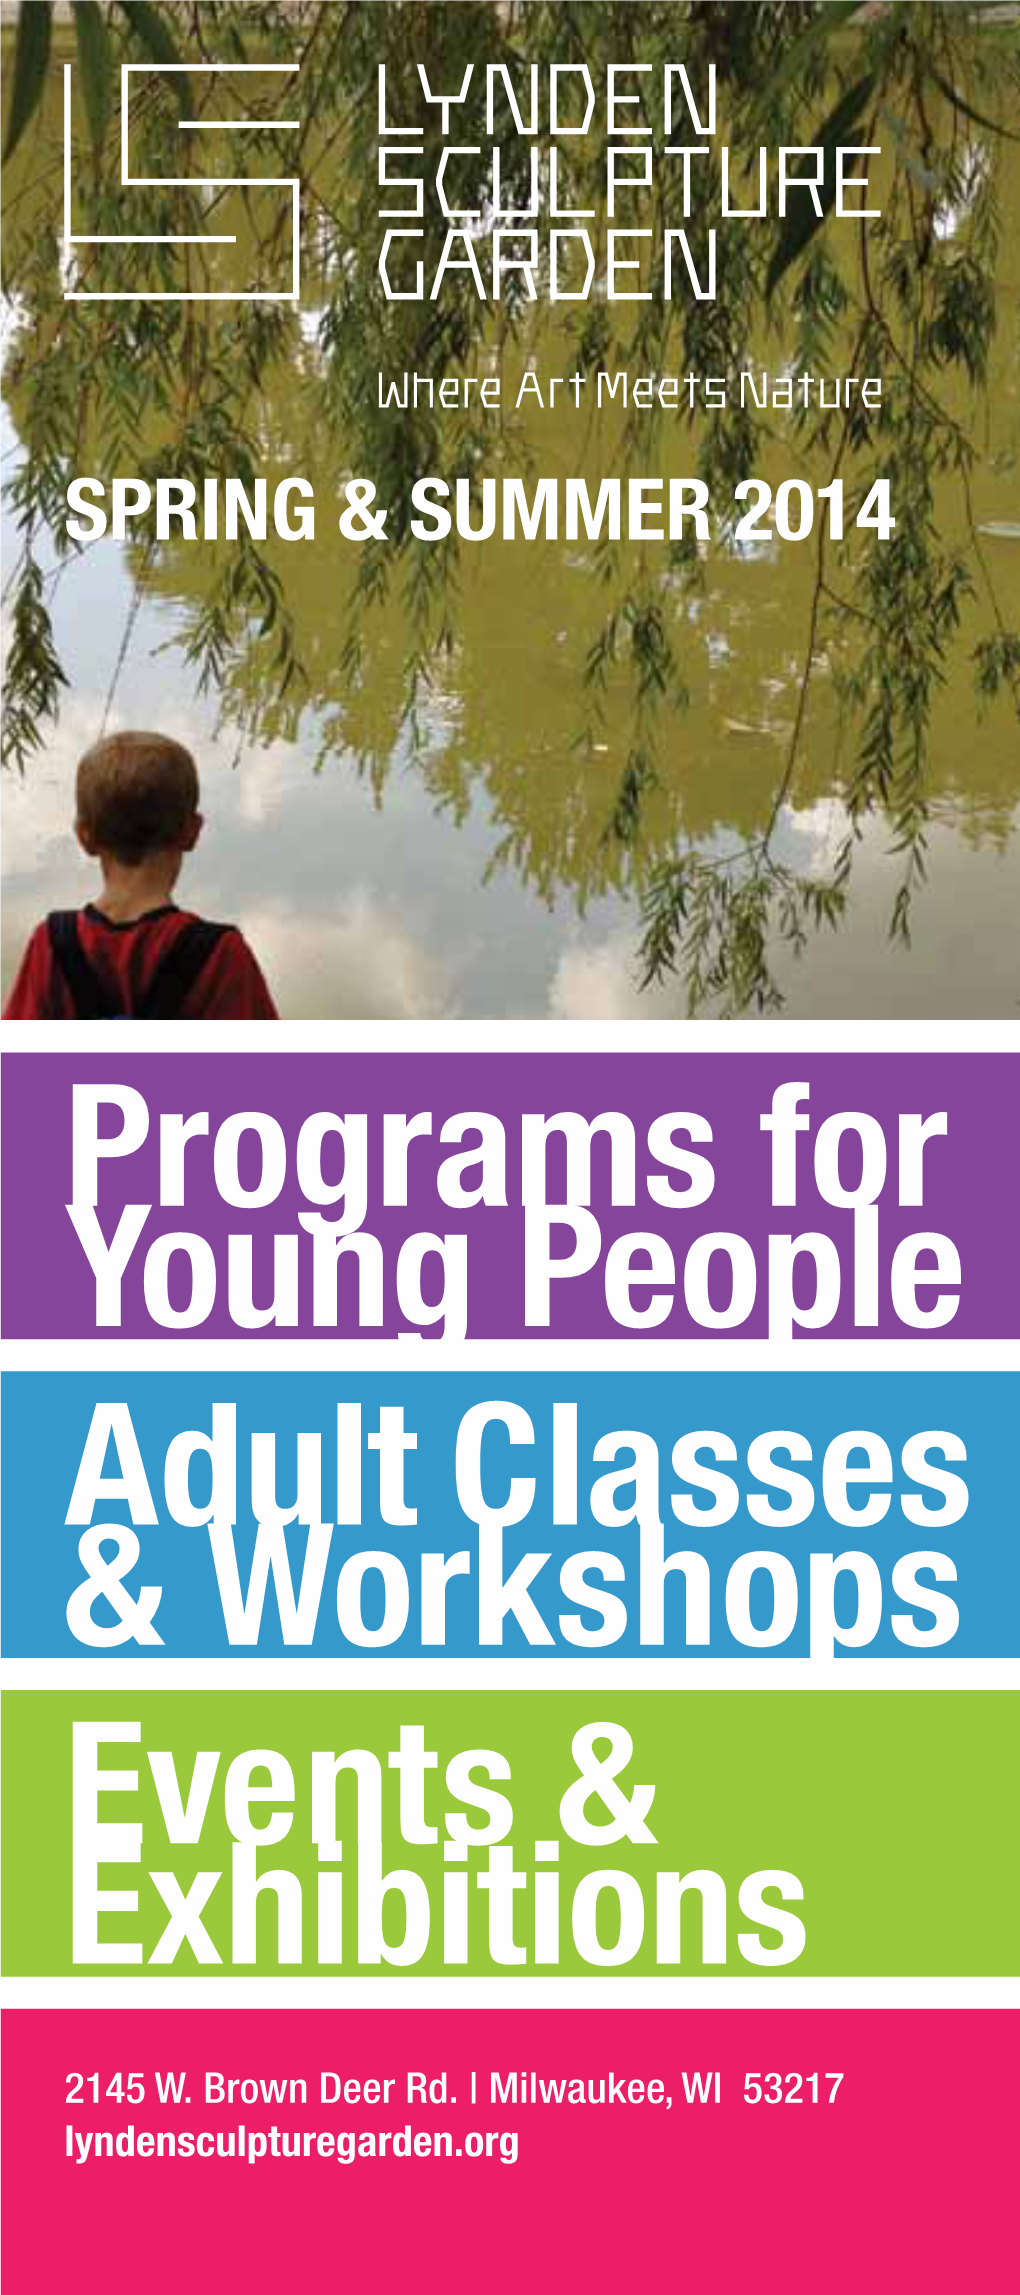 Programs for Young People Adult Classes & Workshops Events